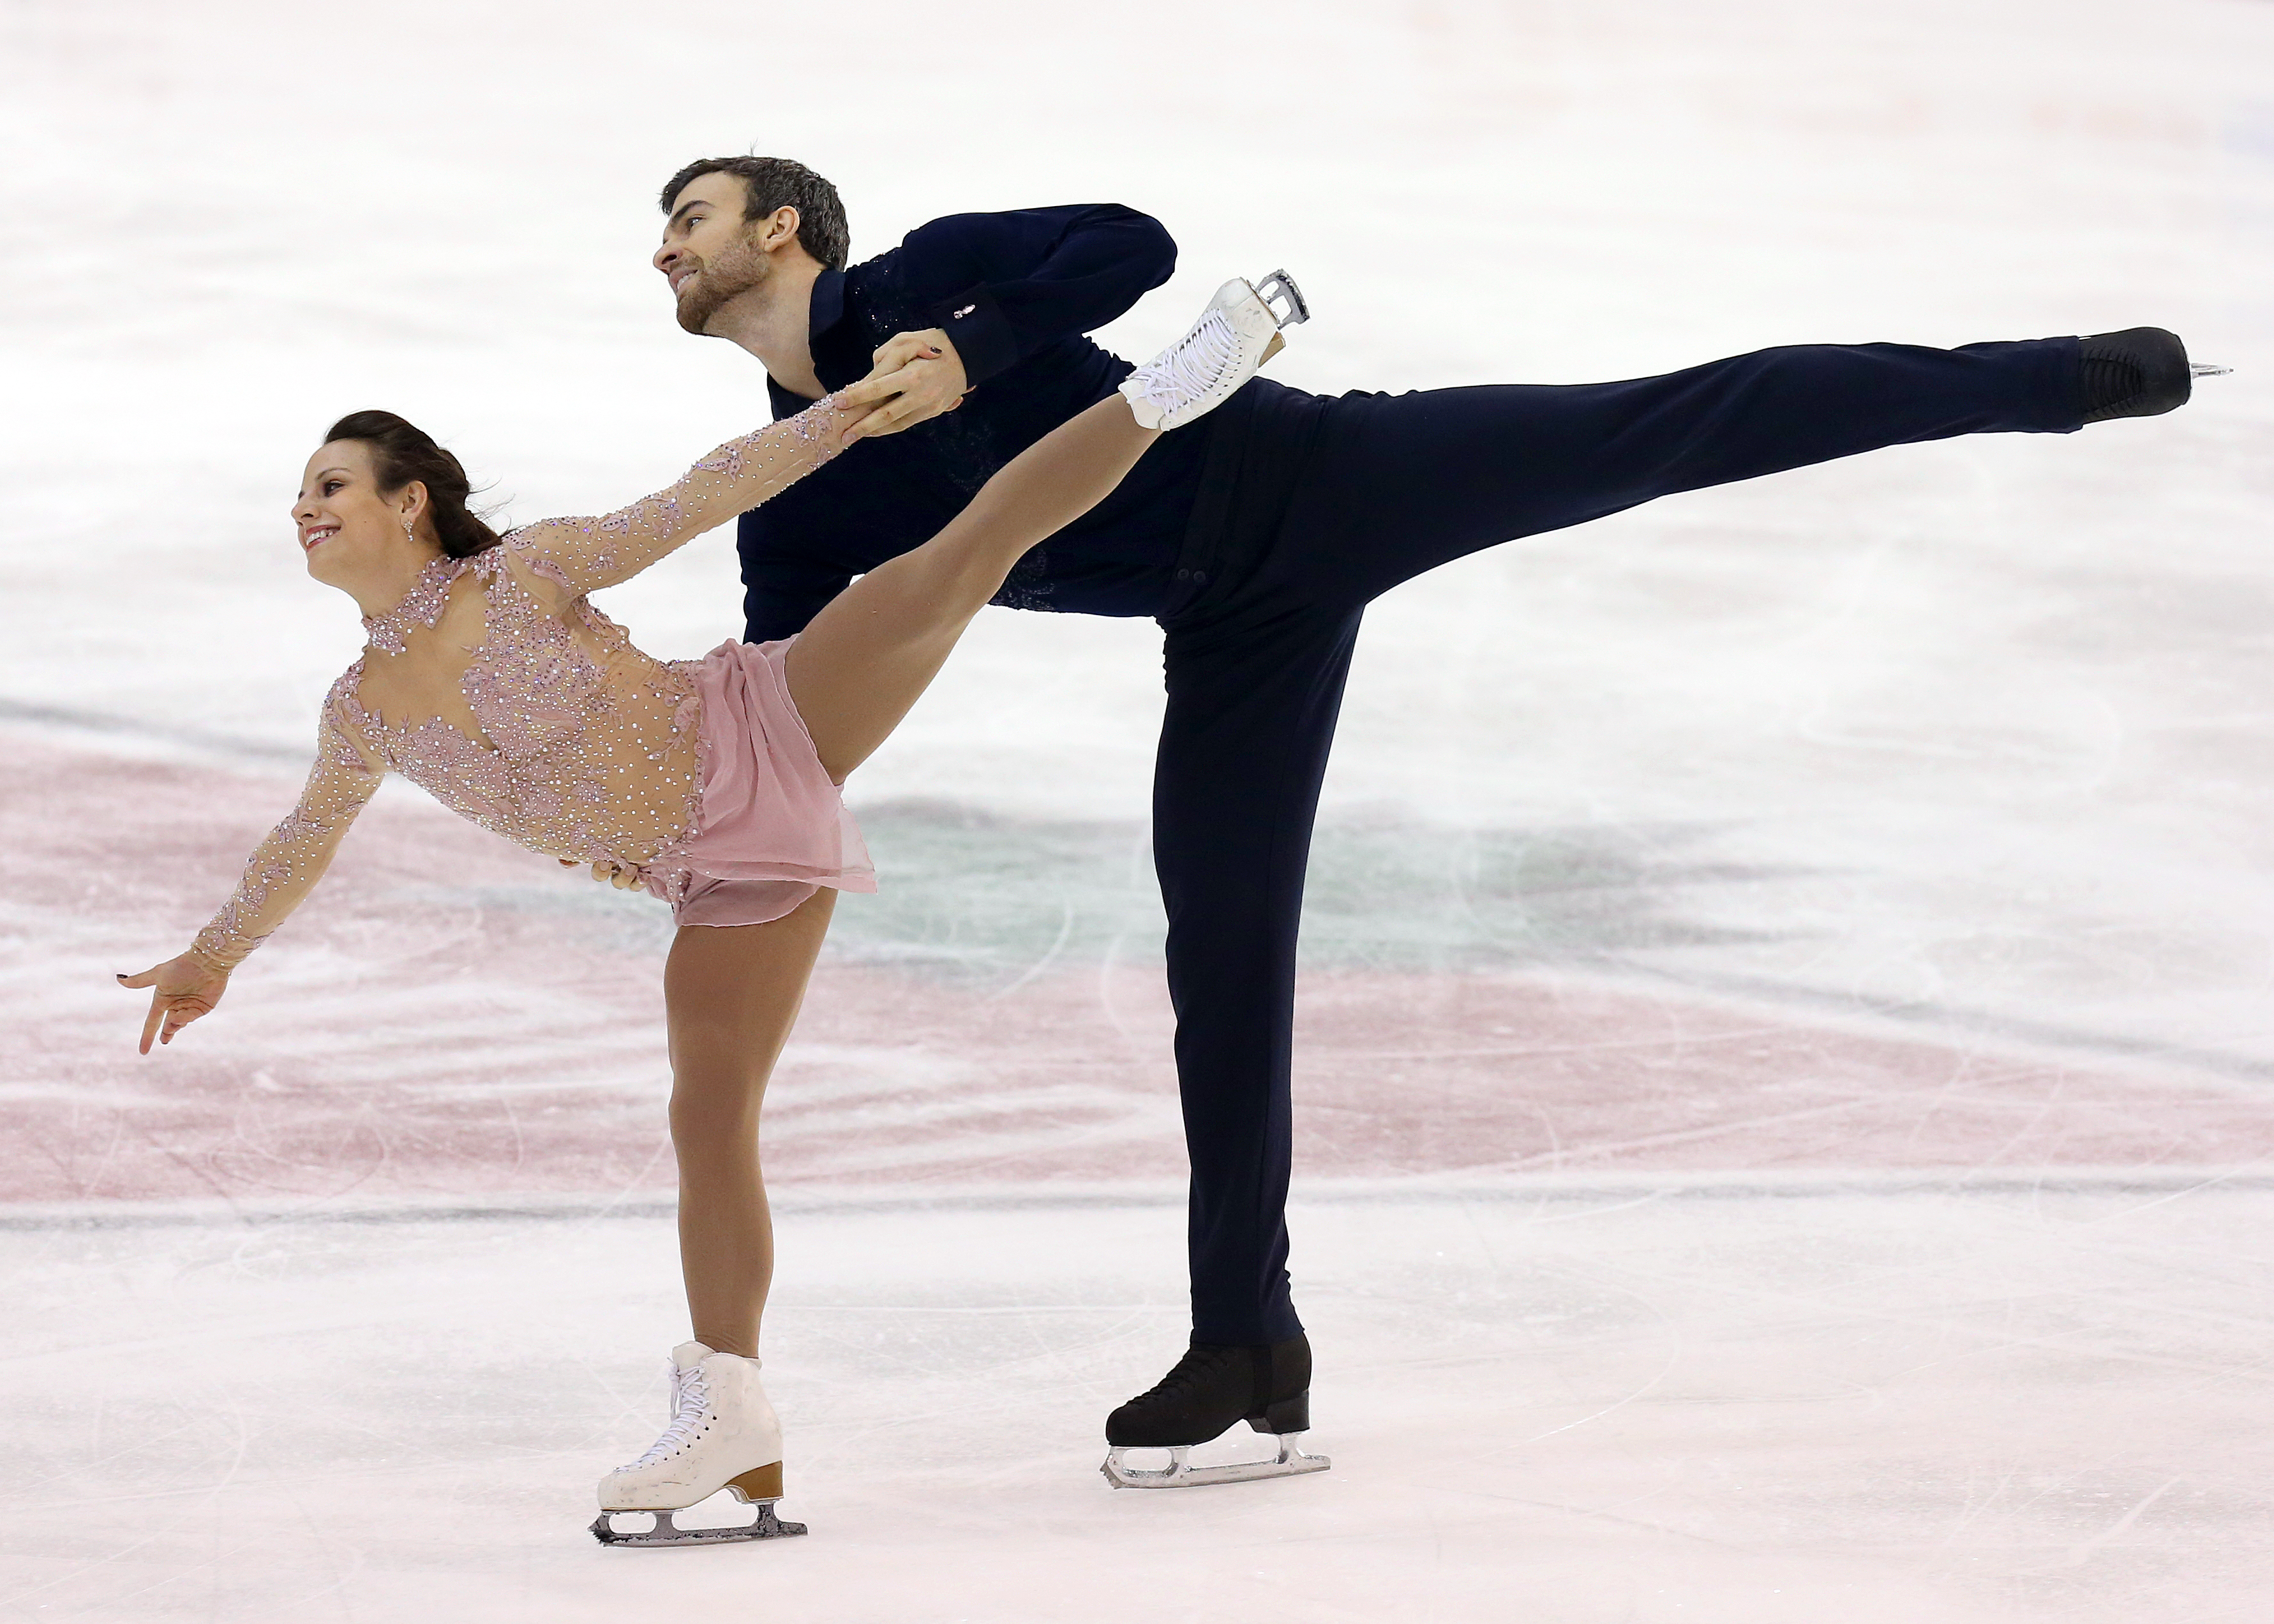 Meagan Duhamel and Eric Radford compete in the pairs free skate at the Canadian Tire National Skating Championships, January, 21, 2017 PHOTO: Greg Kolz